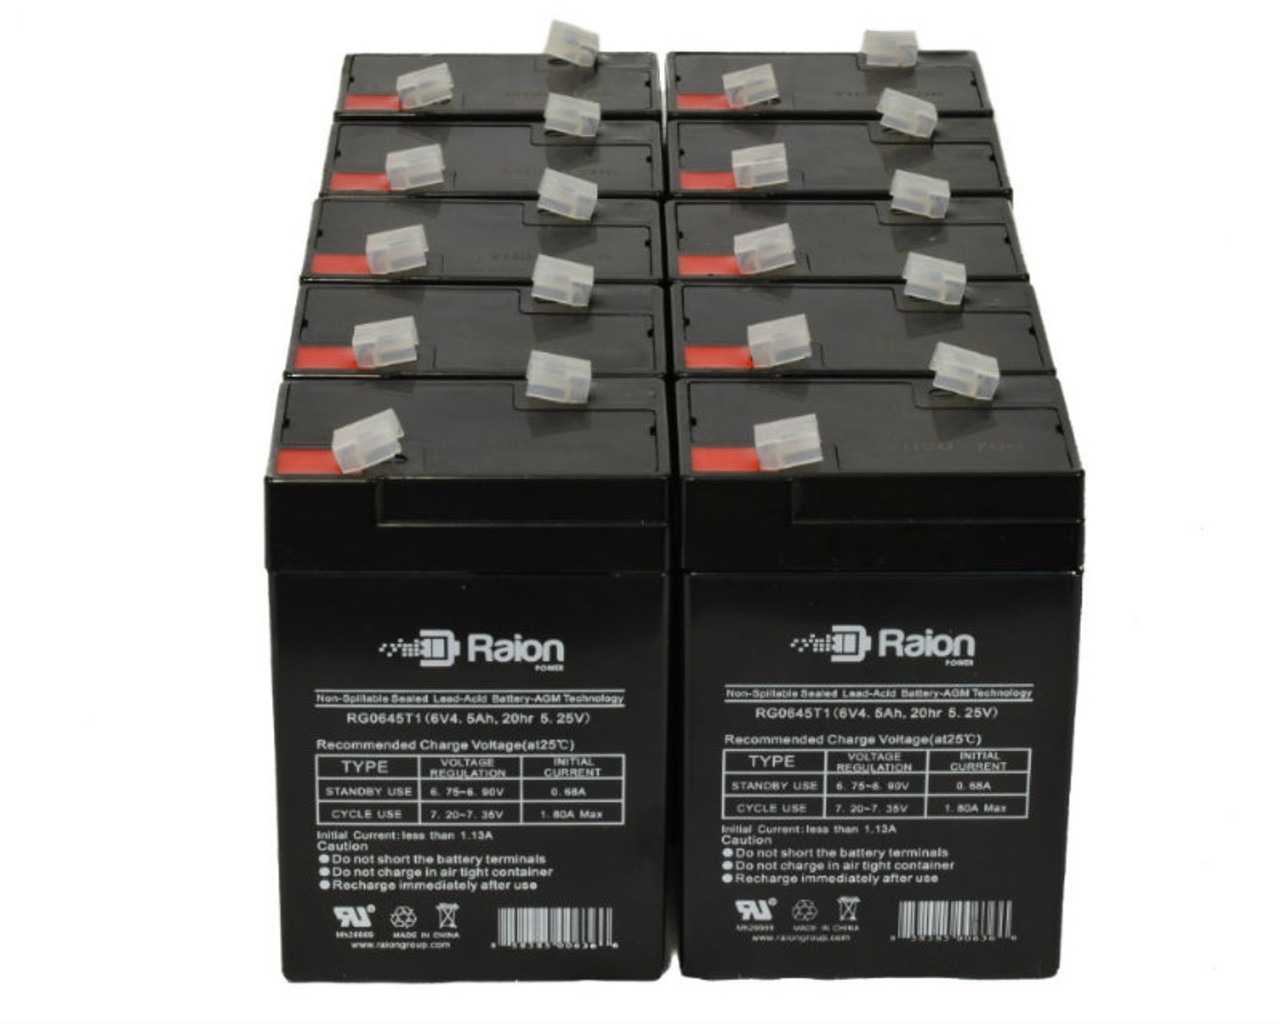 Raion Power 6V 4.5Ah Replacement Emergency Light Battery for Dyna-Ray S18210 - 10 Pack